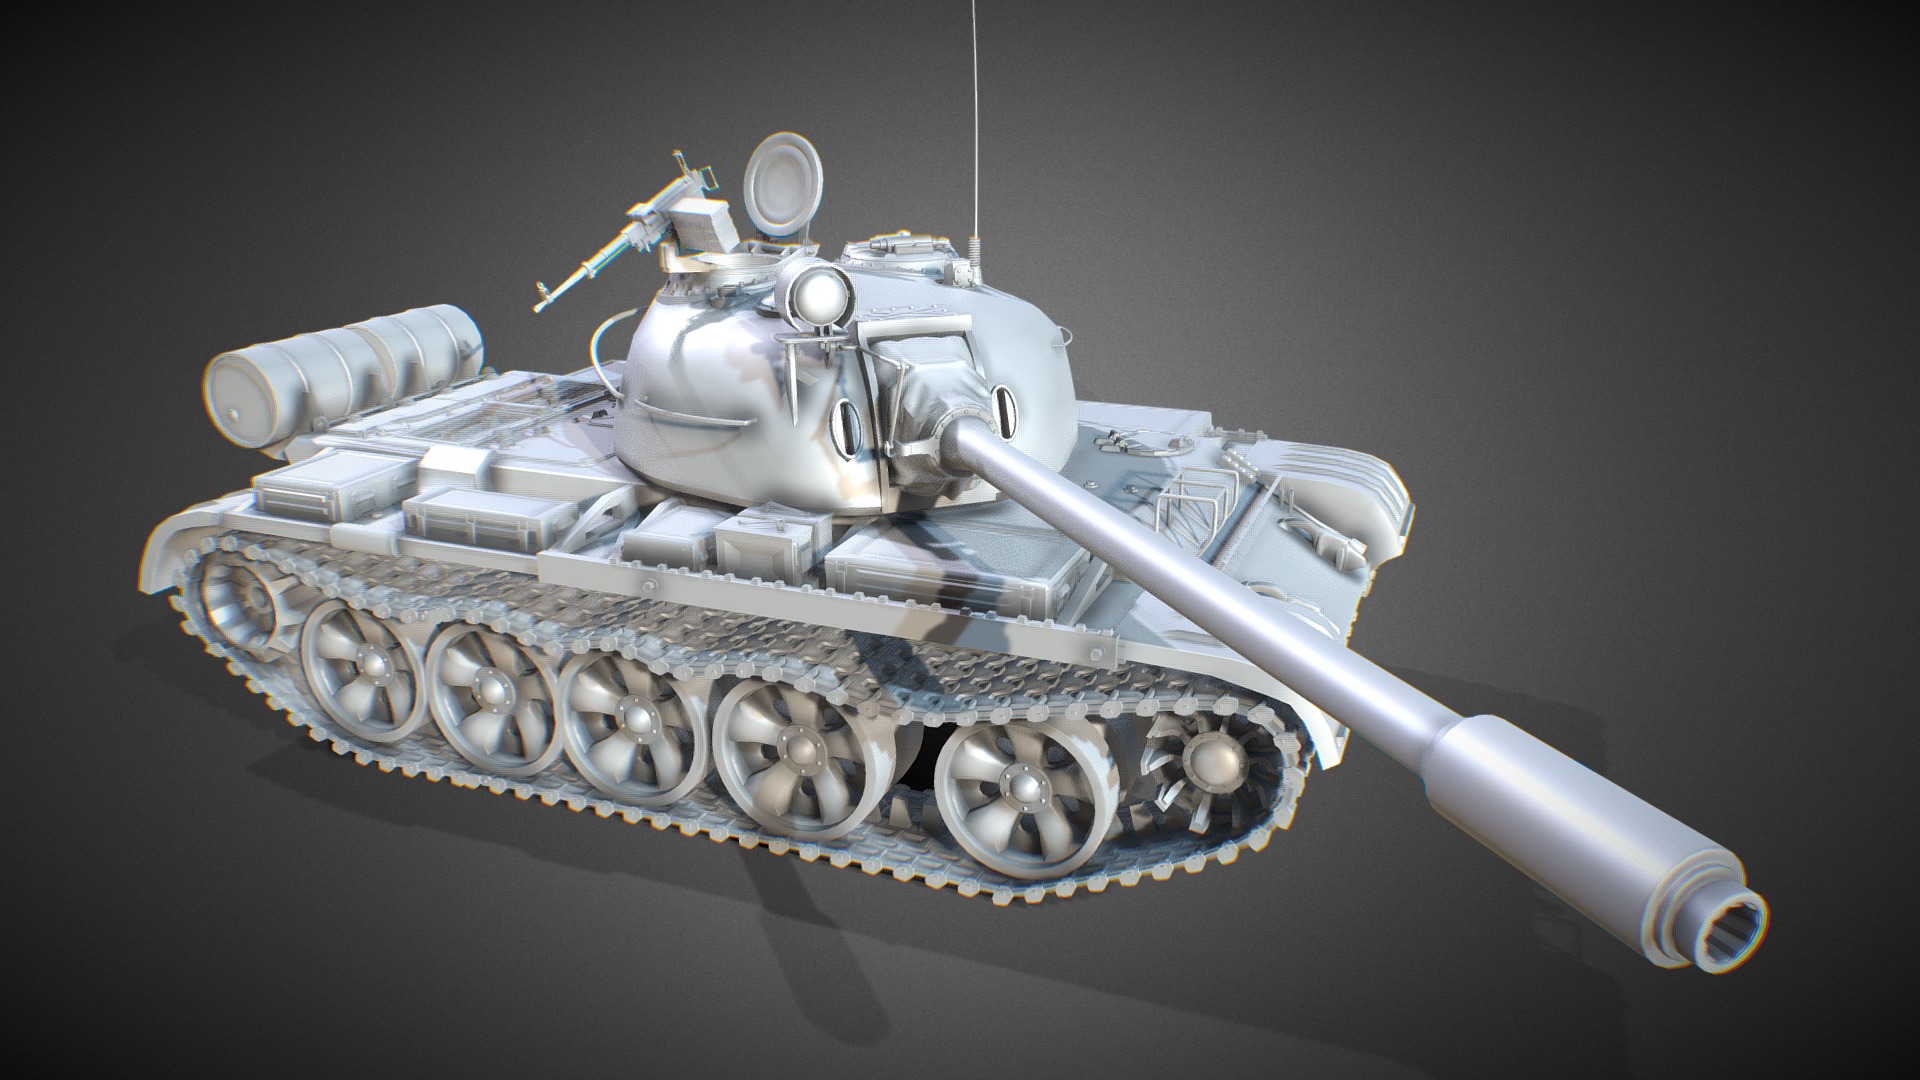 A base model for rending out some keyshot images. Started out as just a blockout but I got a bit carried away, ended up at 185k poly so it shouldn't be too hard to get a low poly out of this model sometime. Made in one day. Also Hurrah for 1st vehicle model.

Have a look at my portfolio :)
www.paulscottdesign.portfoliobox.net/ - Russian T54/55 Tank - 3D model by pasco295 3d model